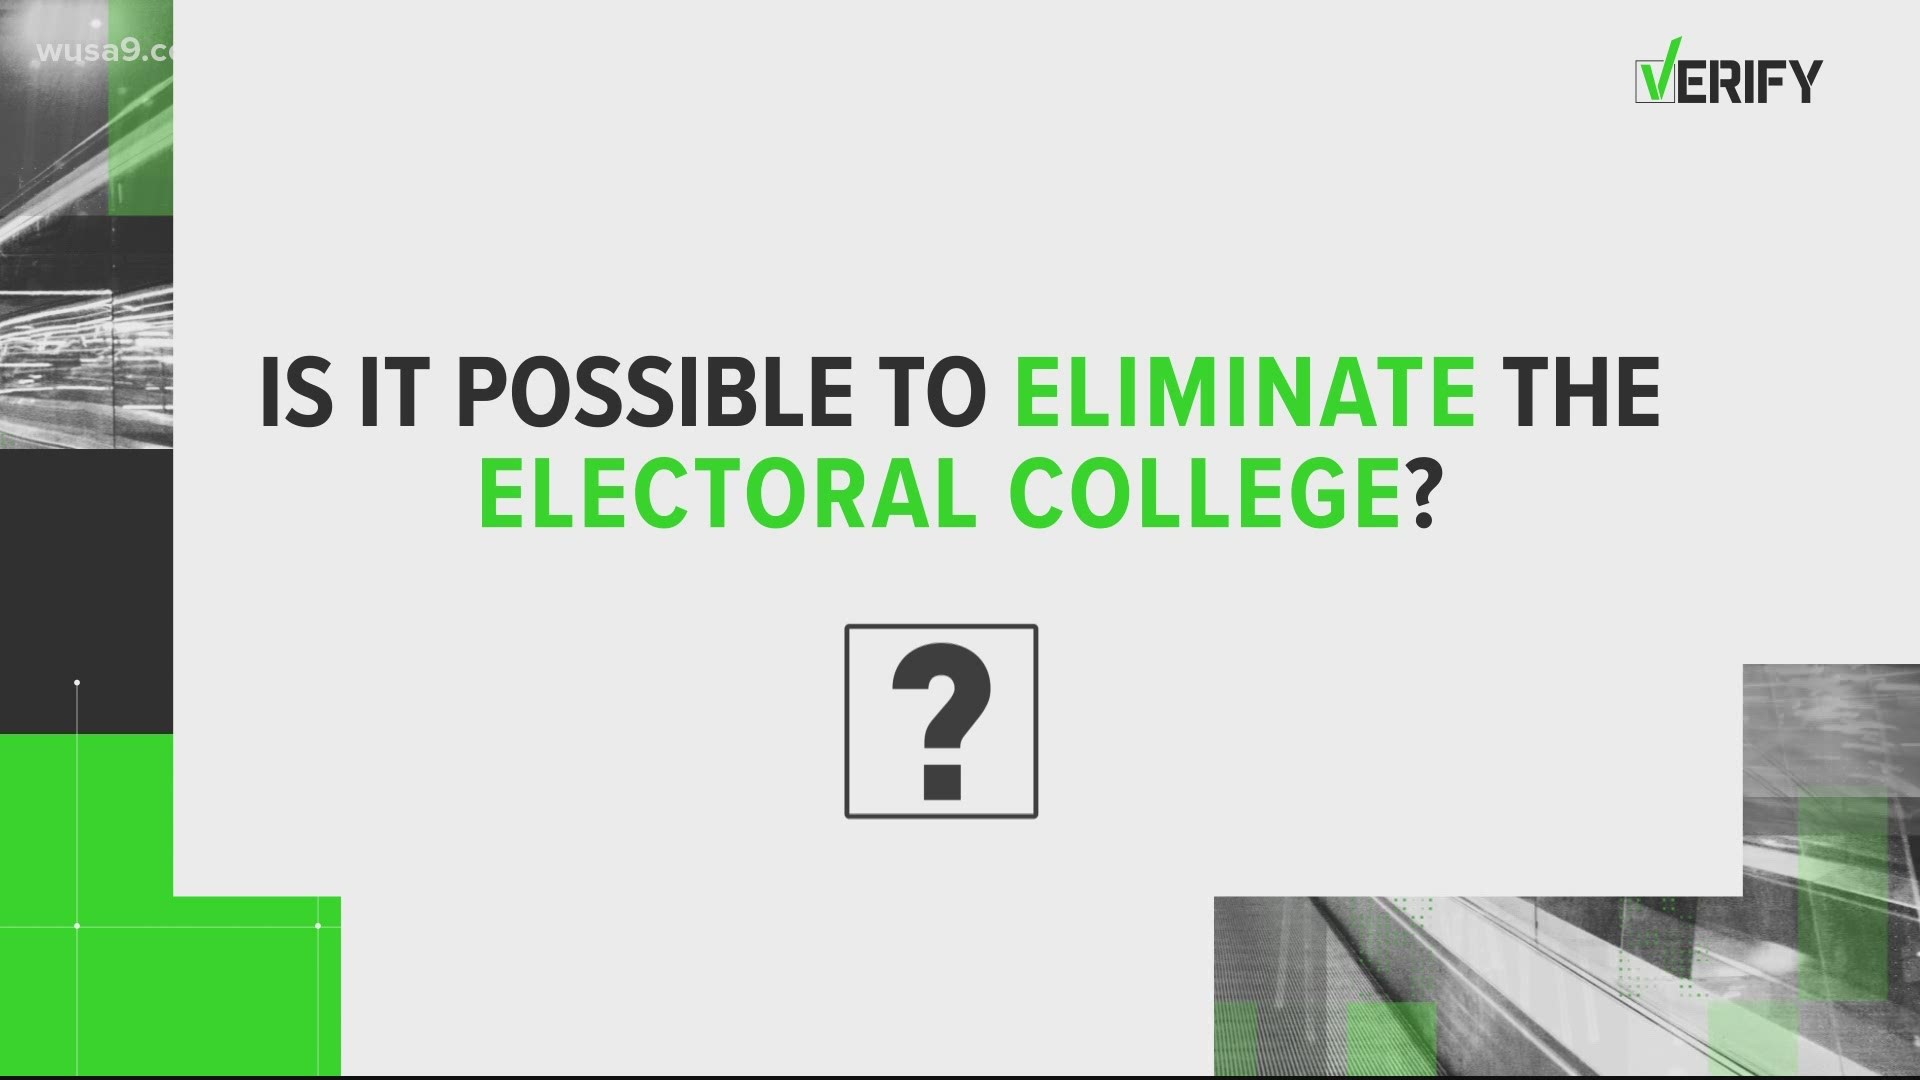 With the technology available to count every vote, some people are now asking if the Electoral College is still needed?